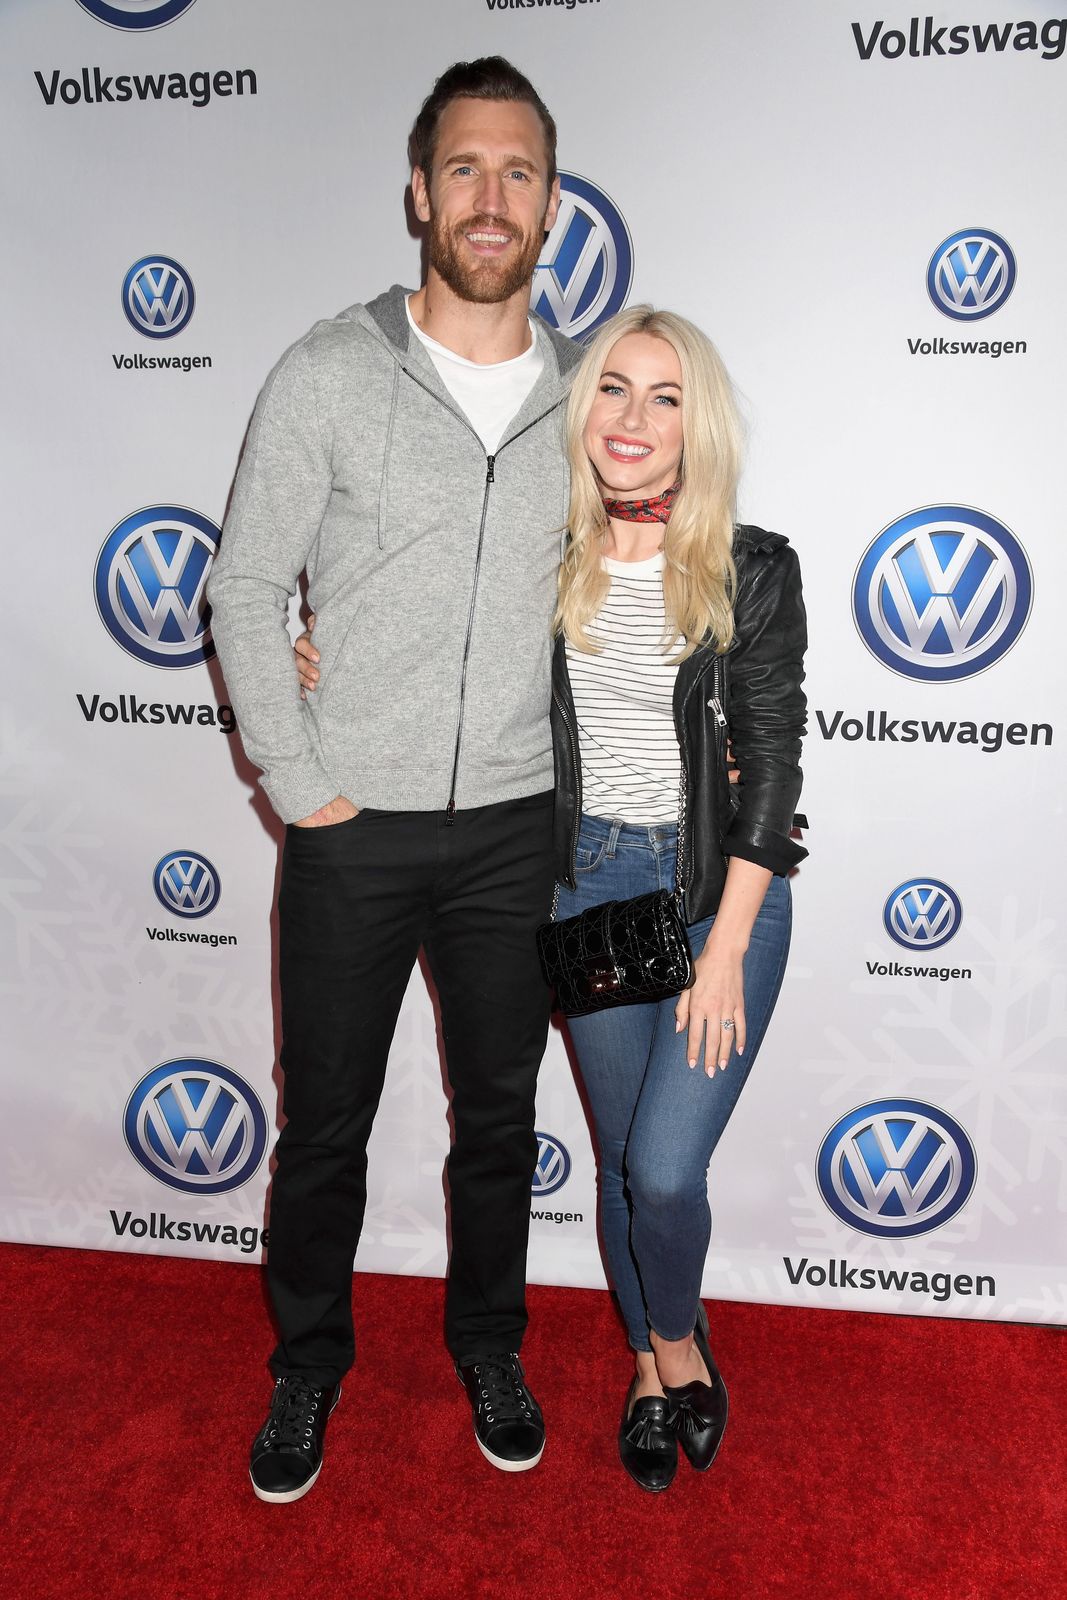 Brooks Laich and Julianne Hough at the Volkswagen Holiday Drive-In event in Los Angeles, California on December 16, 2017 | Photo: Jennifer Graylock/Getty Images